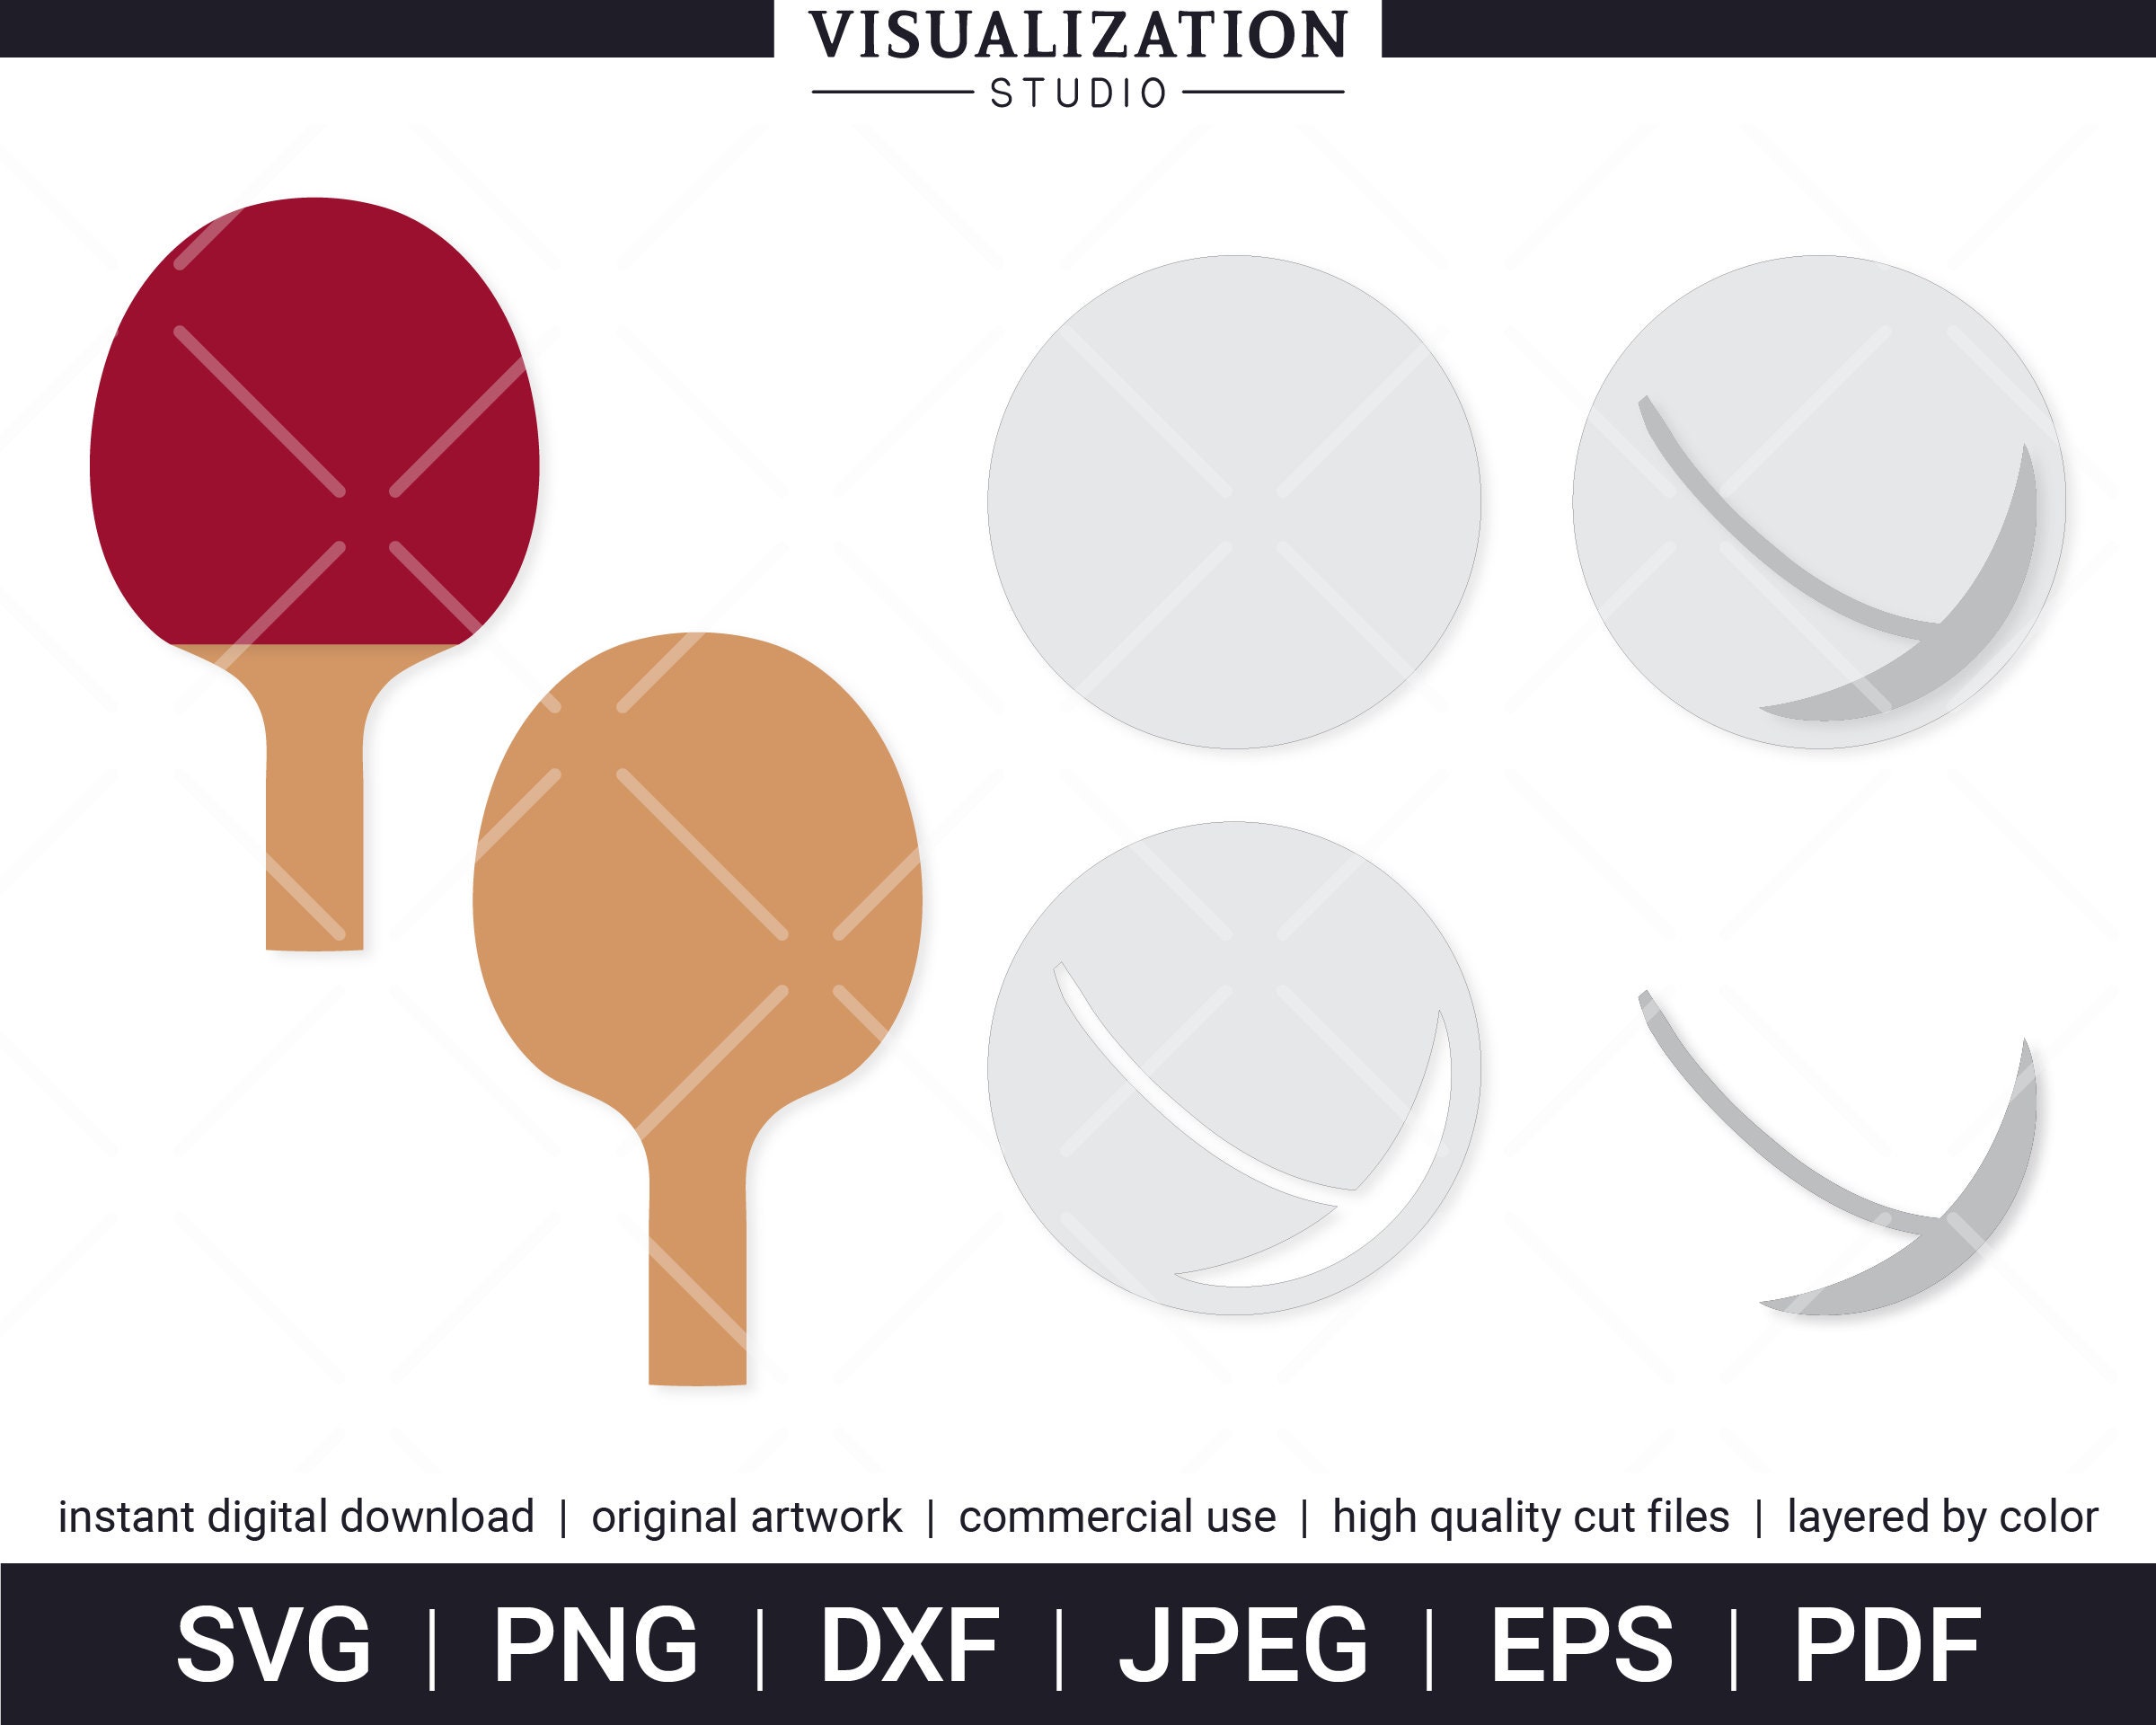 Clipart Raquette Ping Pong  Free Images at  - vector clip art  online, royalty free & public domain